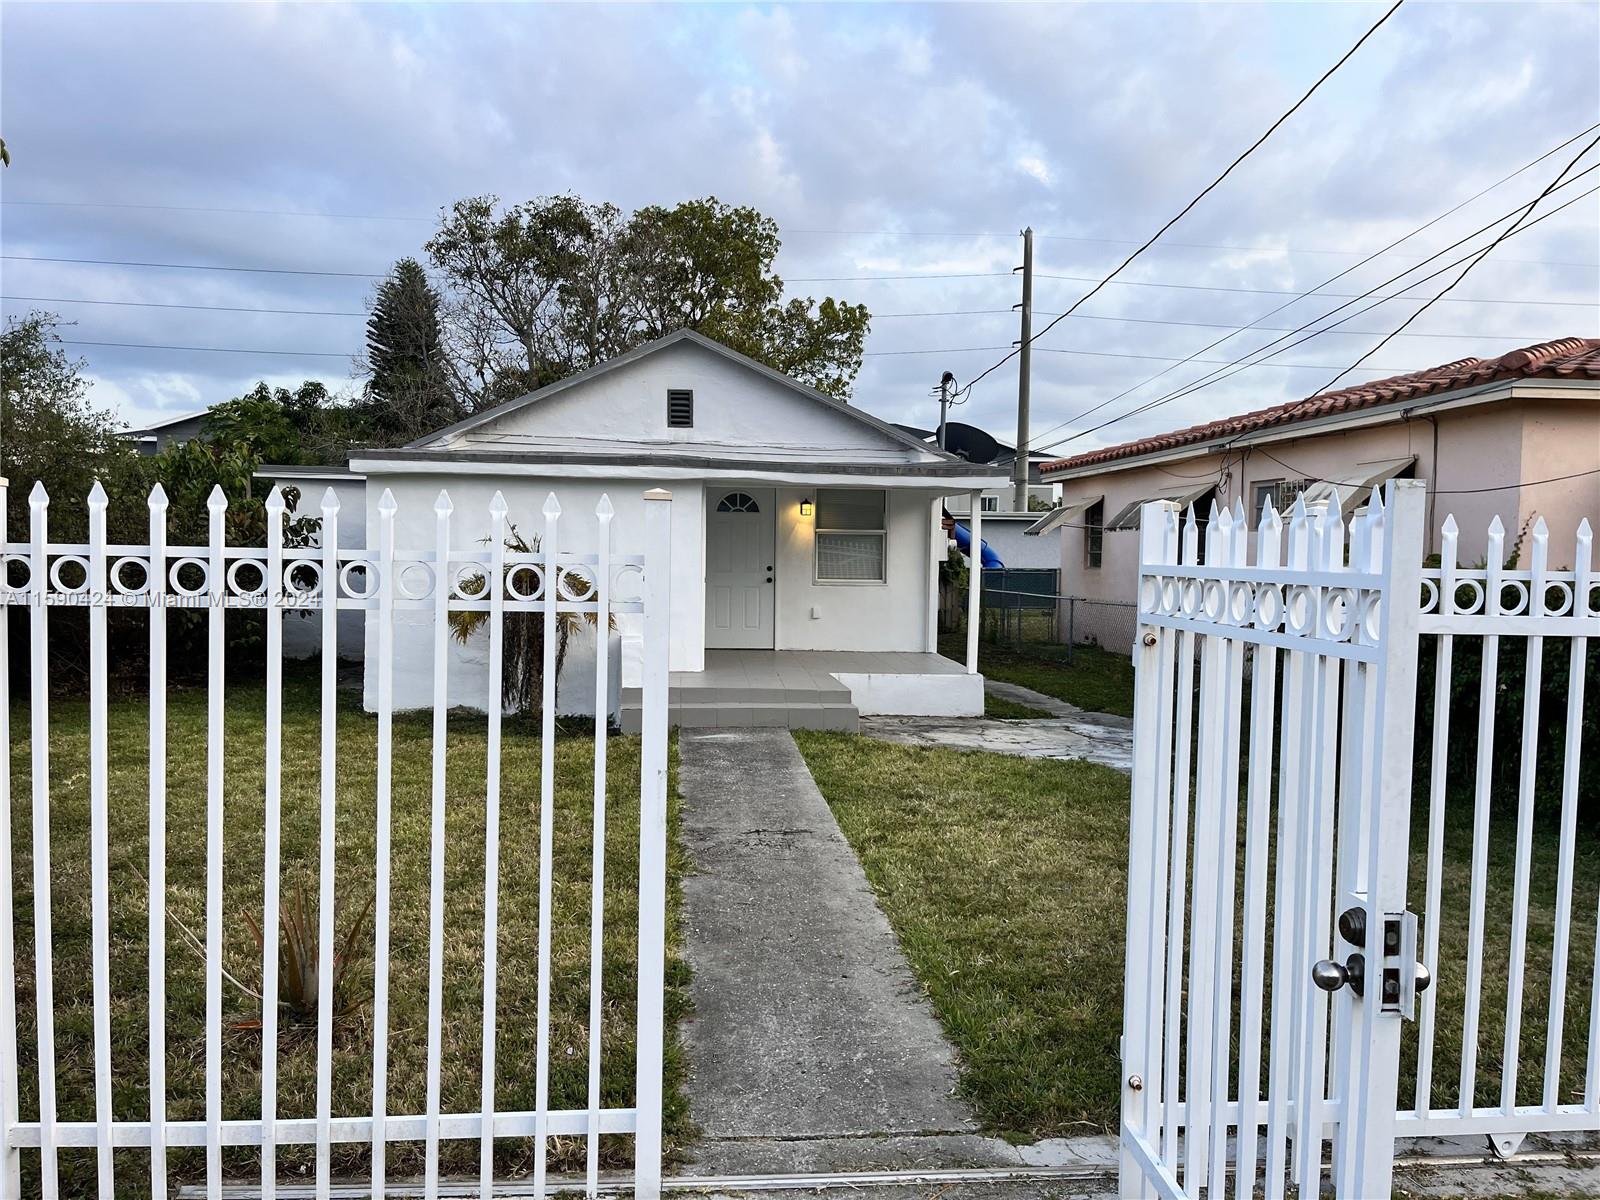 Excellent house located in an opportunity zone, with a lot of upgrades and ready to move in or for investment.